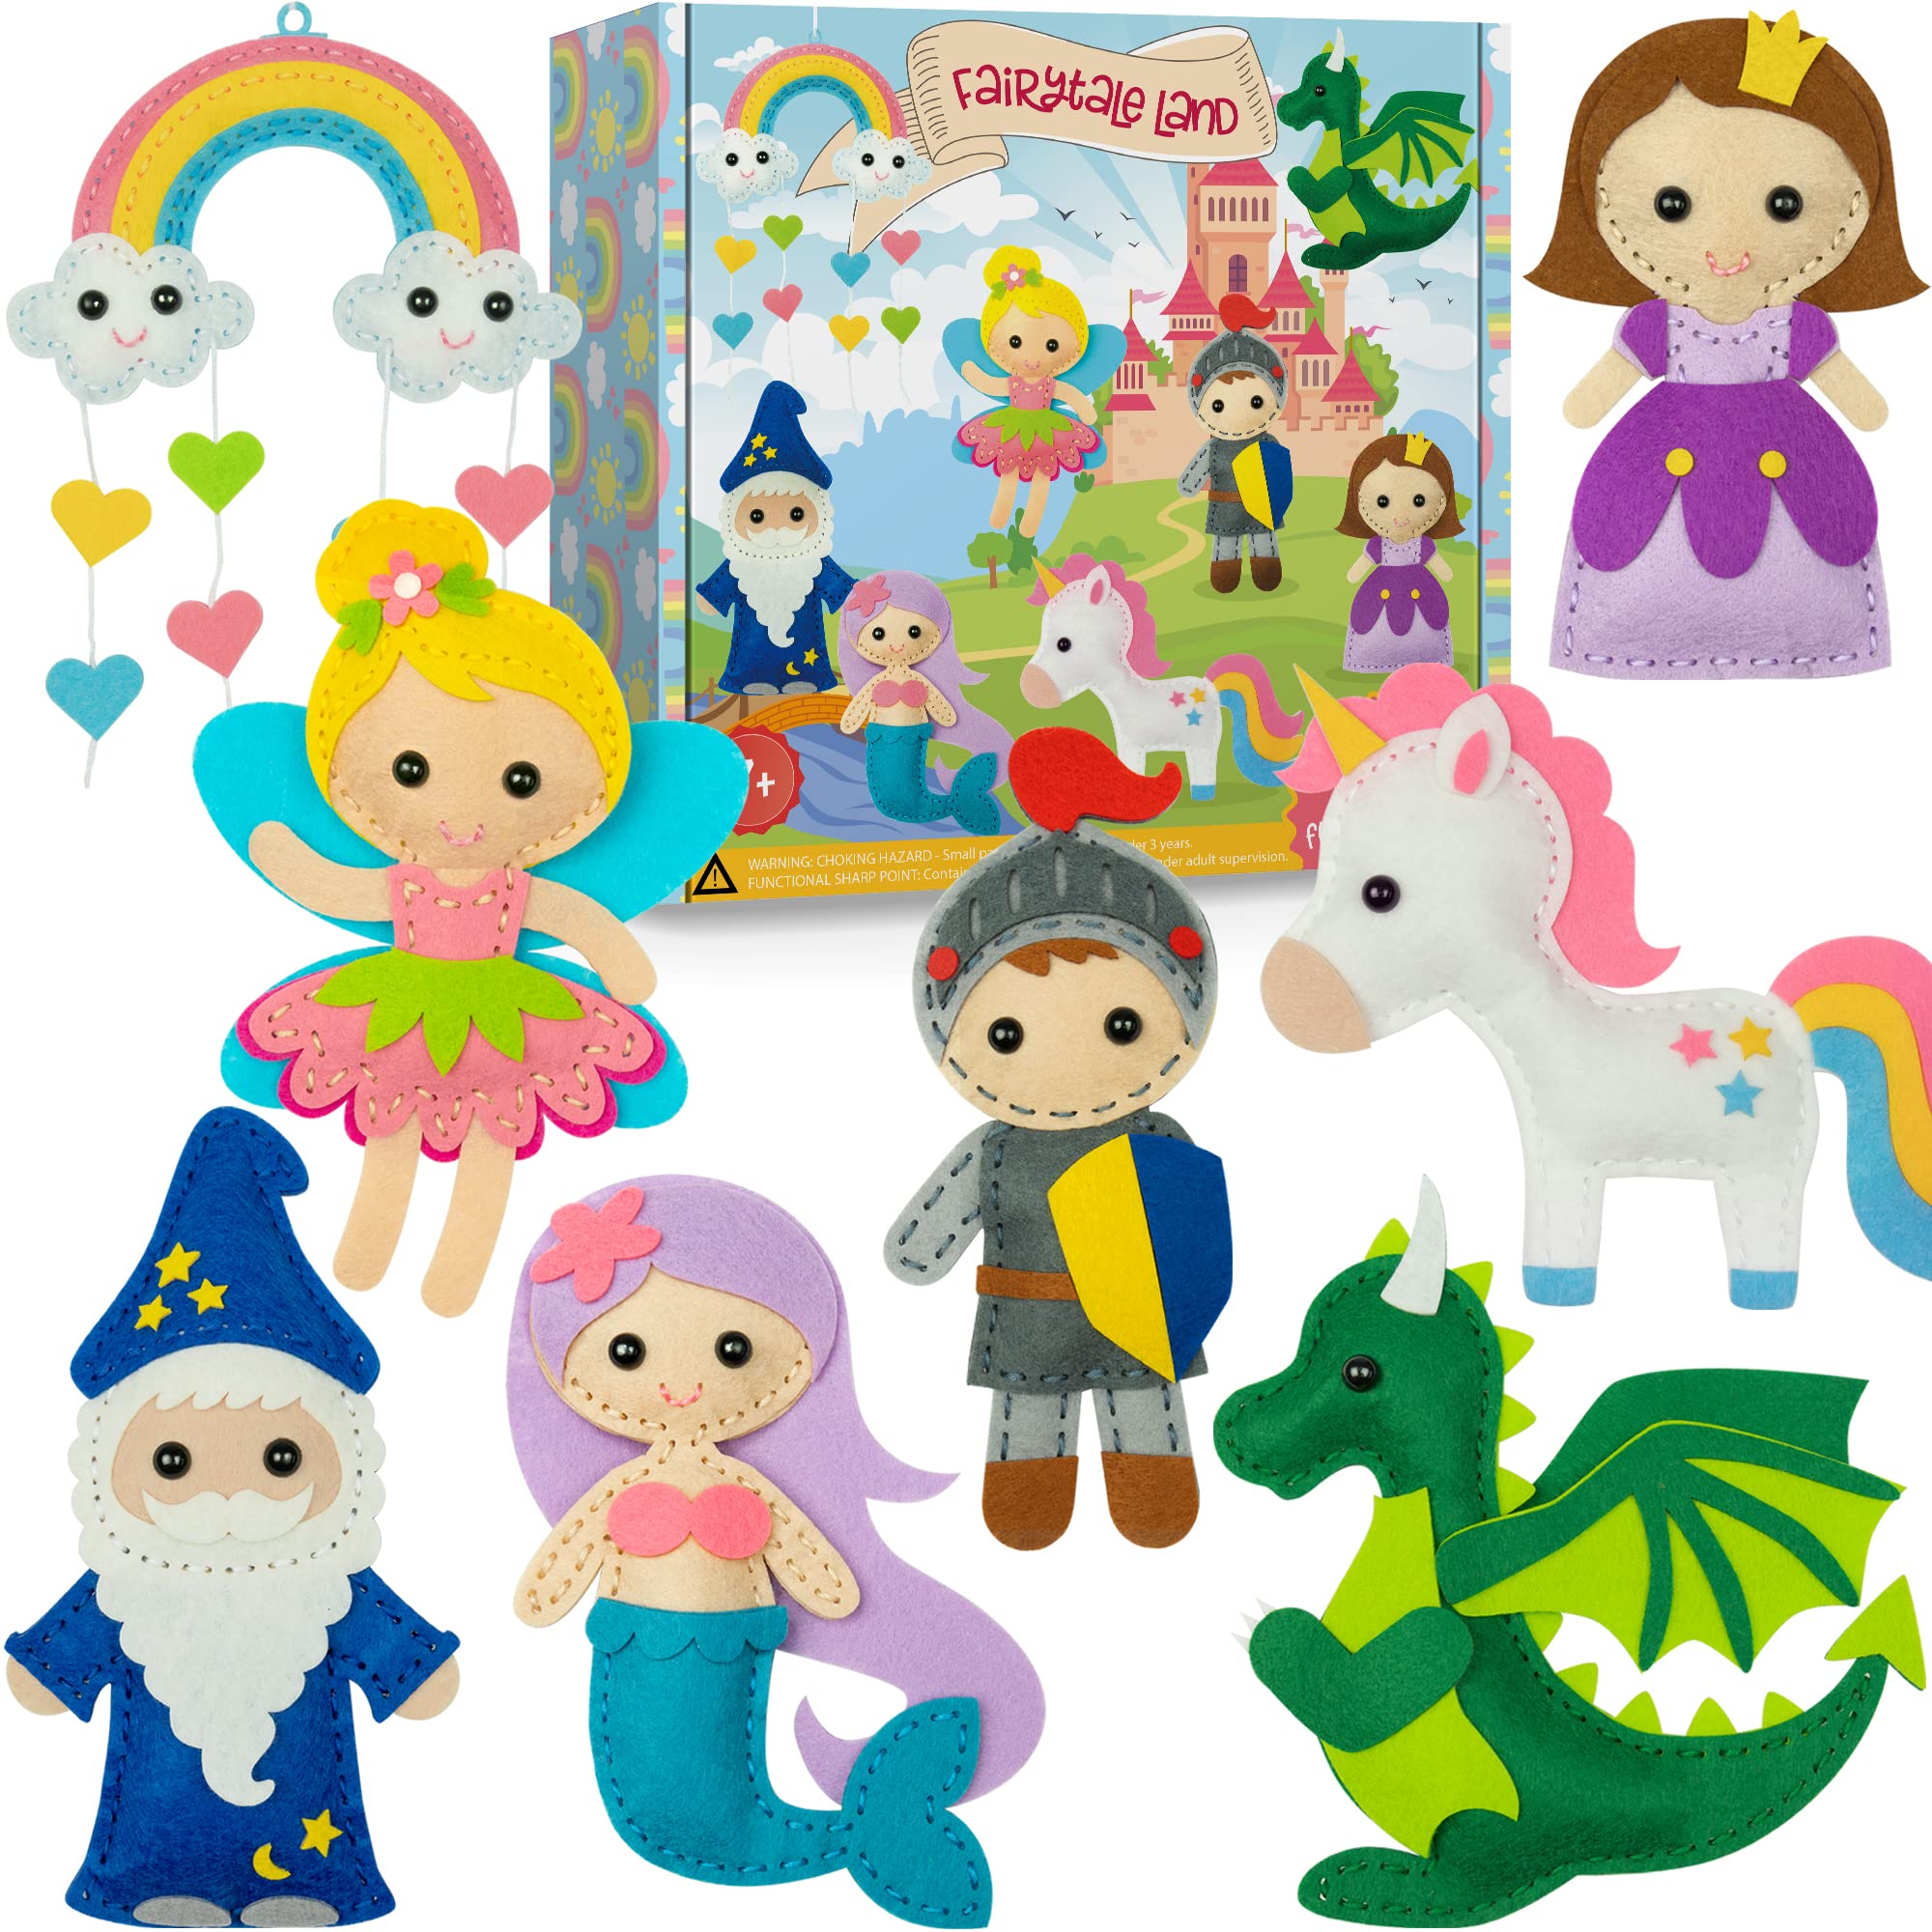 Craftorama Sewing Kit for Kids, Fun and Educational Fairytale Craft Set for Boys and Girls Age 7-12, Sew Your Own Felt Animals Craft Kit for Beginners, 165 Piece Set